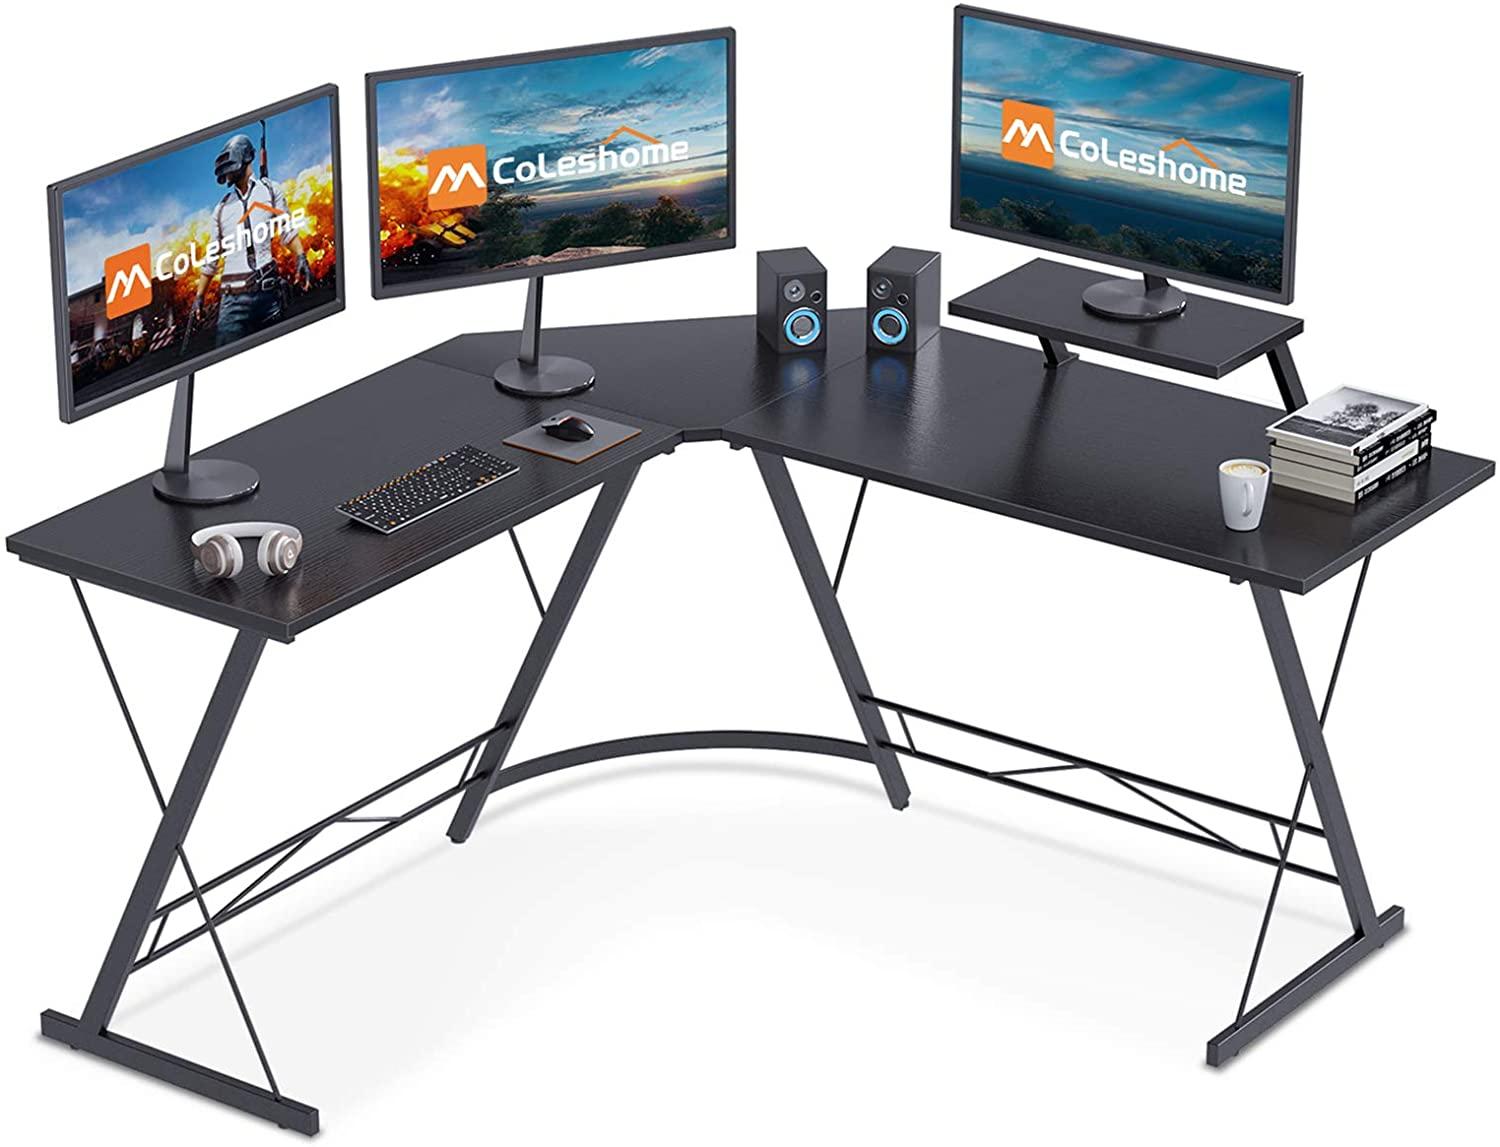 Coleshome 51in L-Shaped Corner Computer Desk with Shelf for $49.99 Shipped